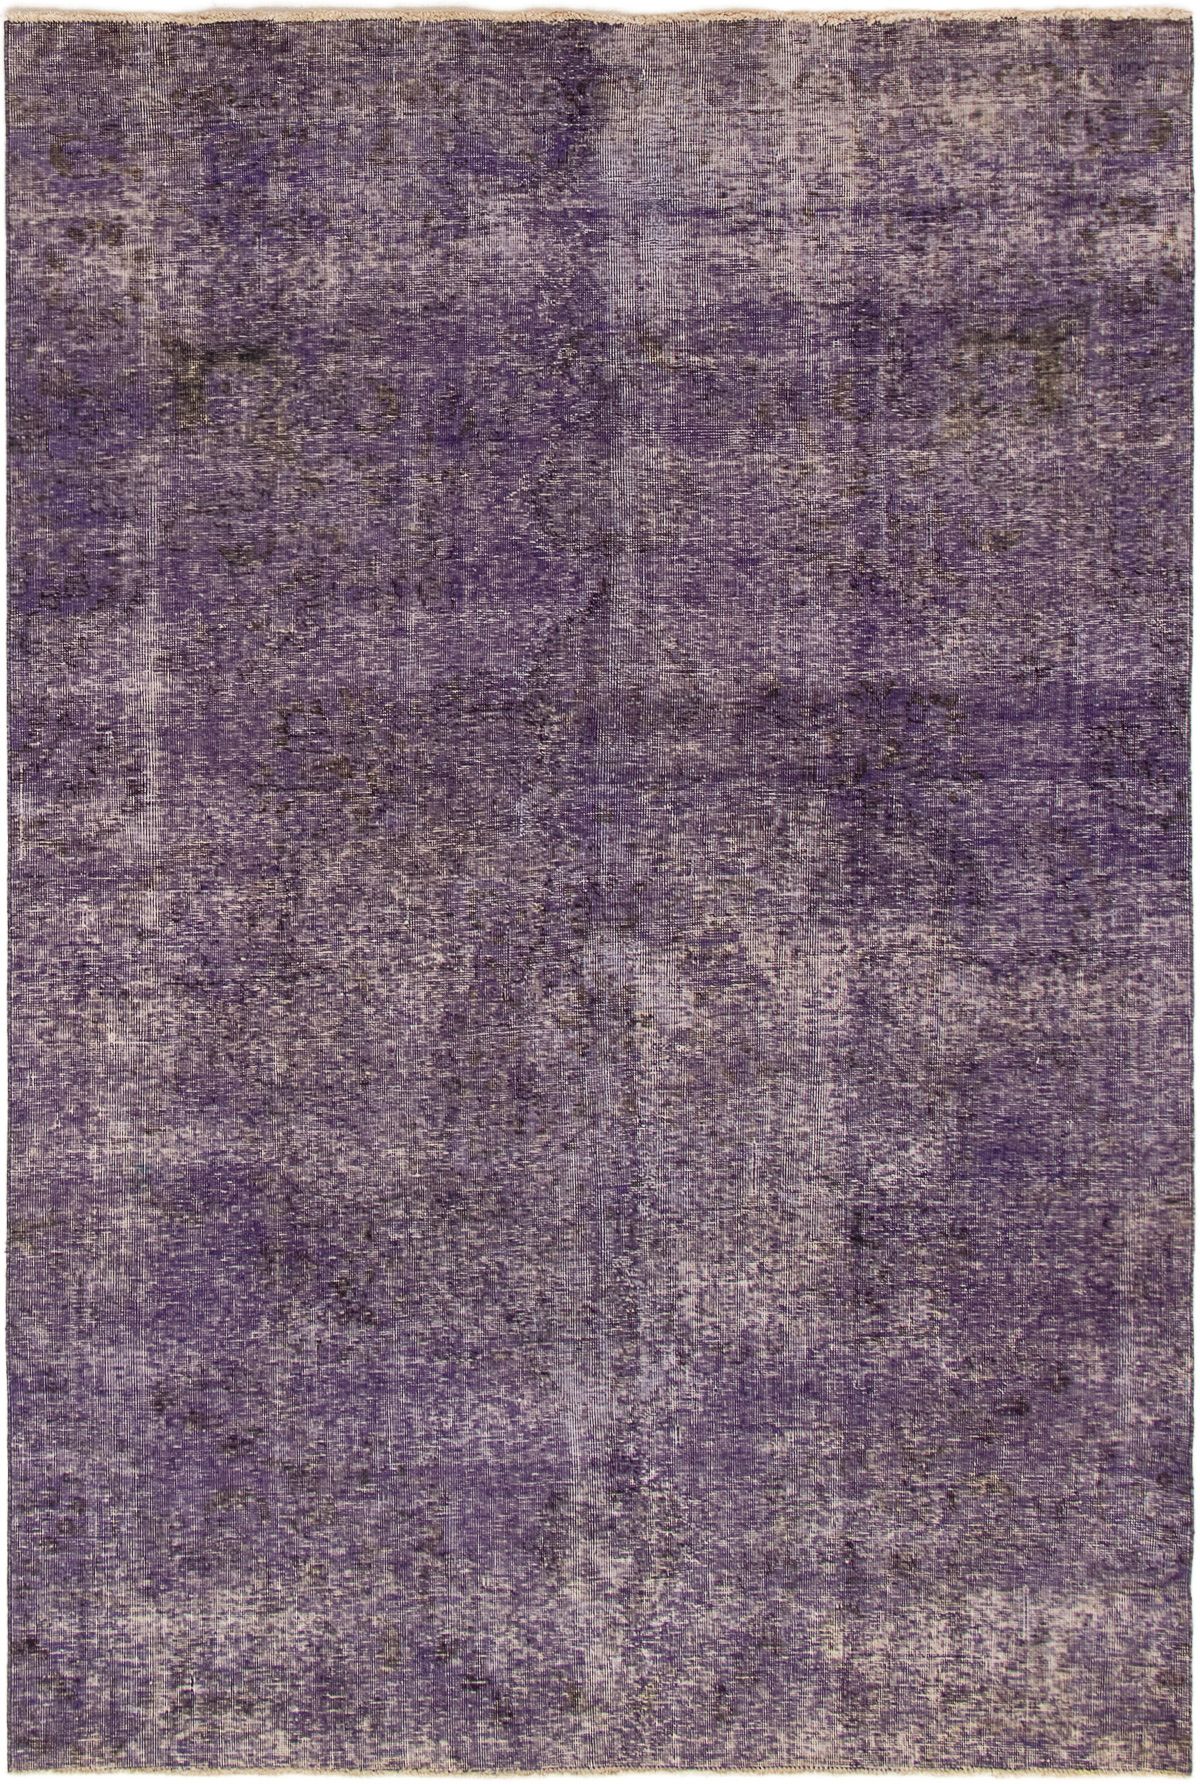 Hand-knotted Color Transition Indigo Wool Rug 6'0" x 9'1" Size: 6'0" x 9'1"  